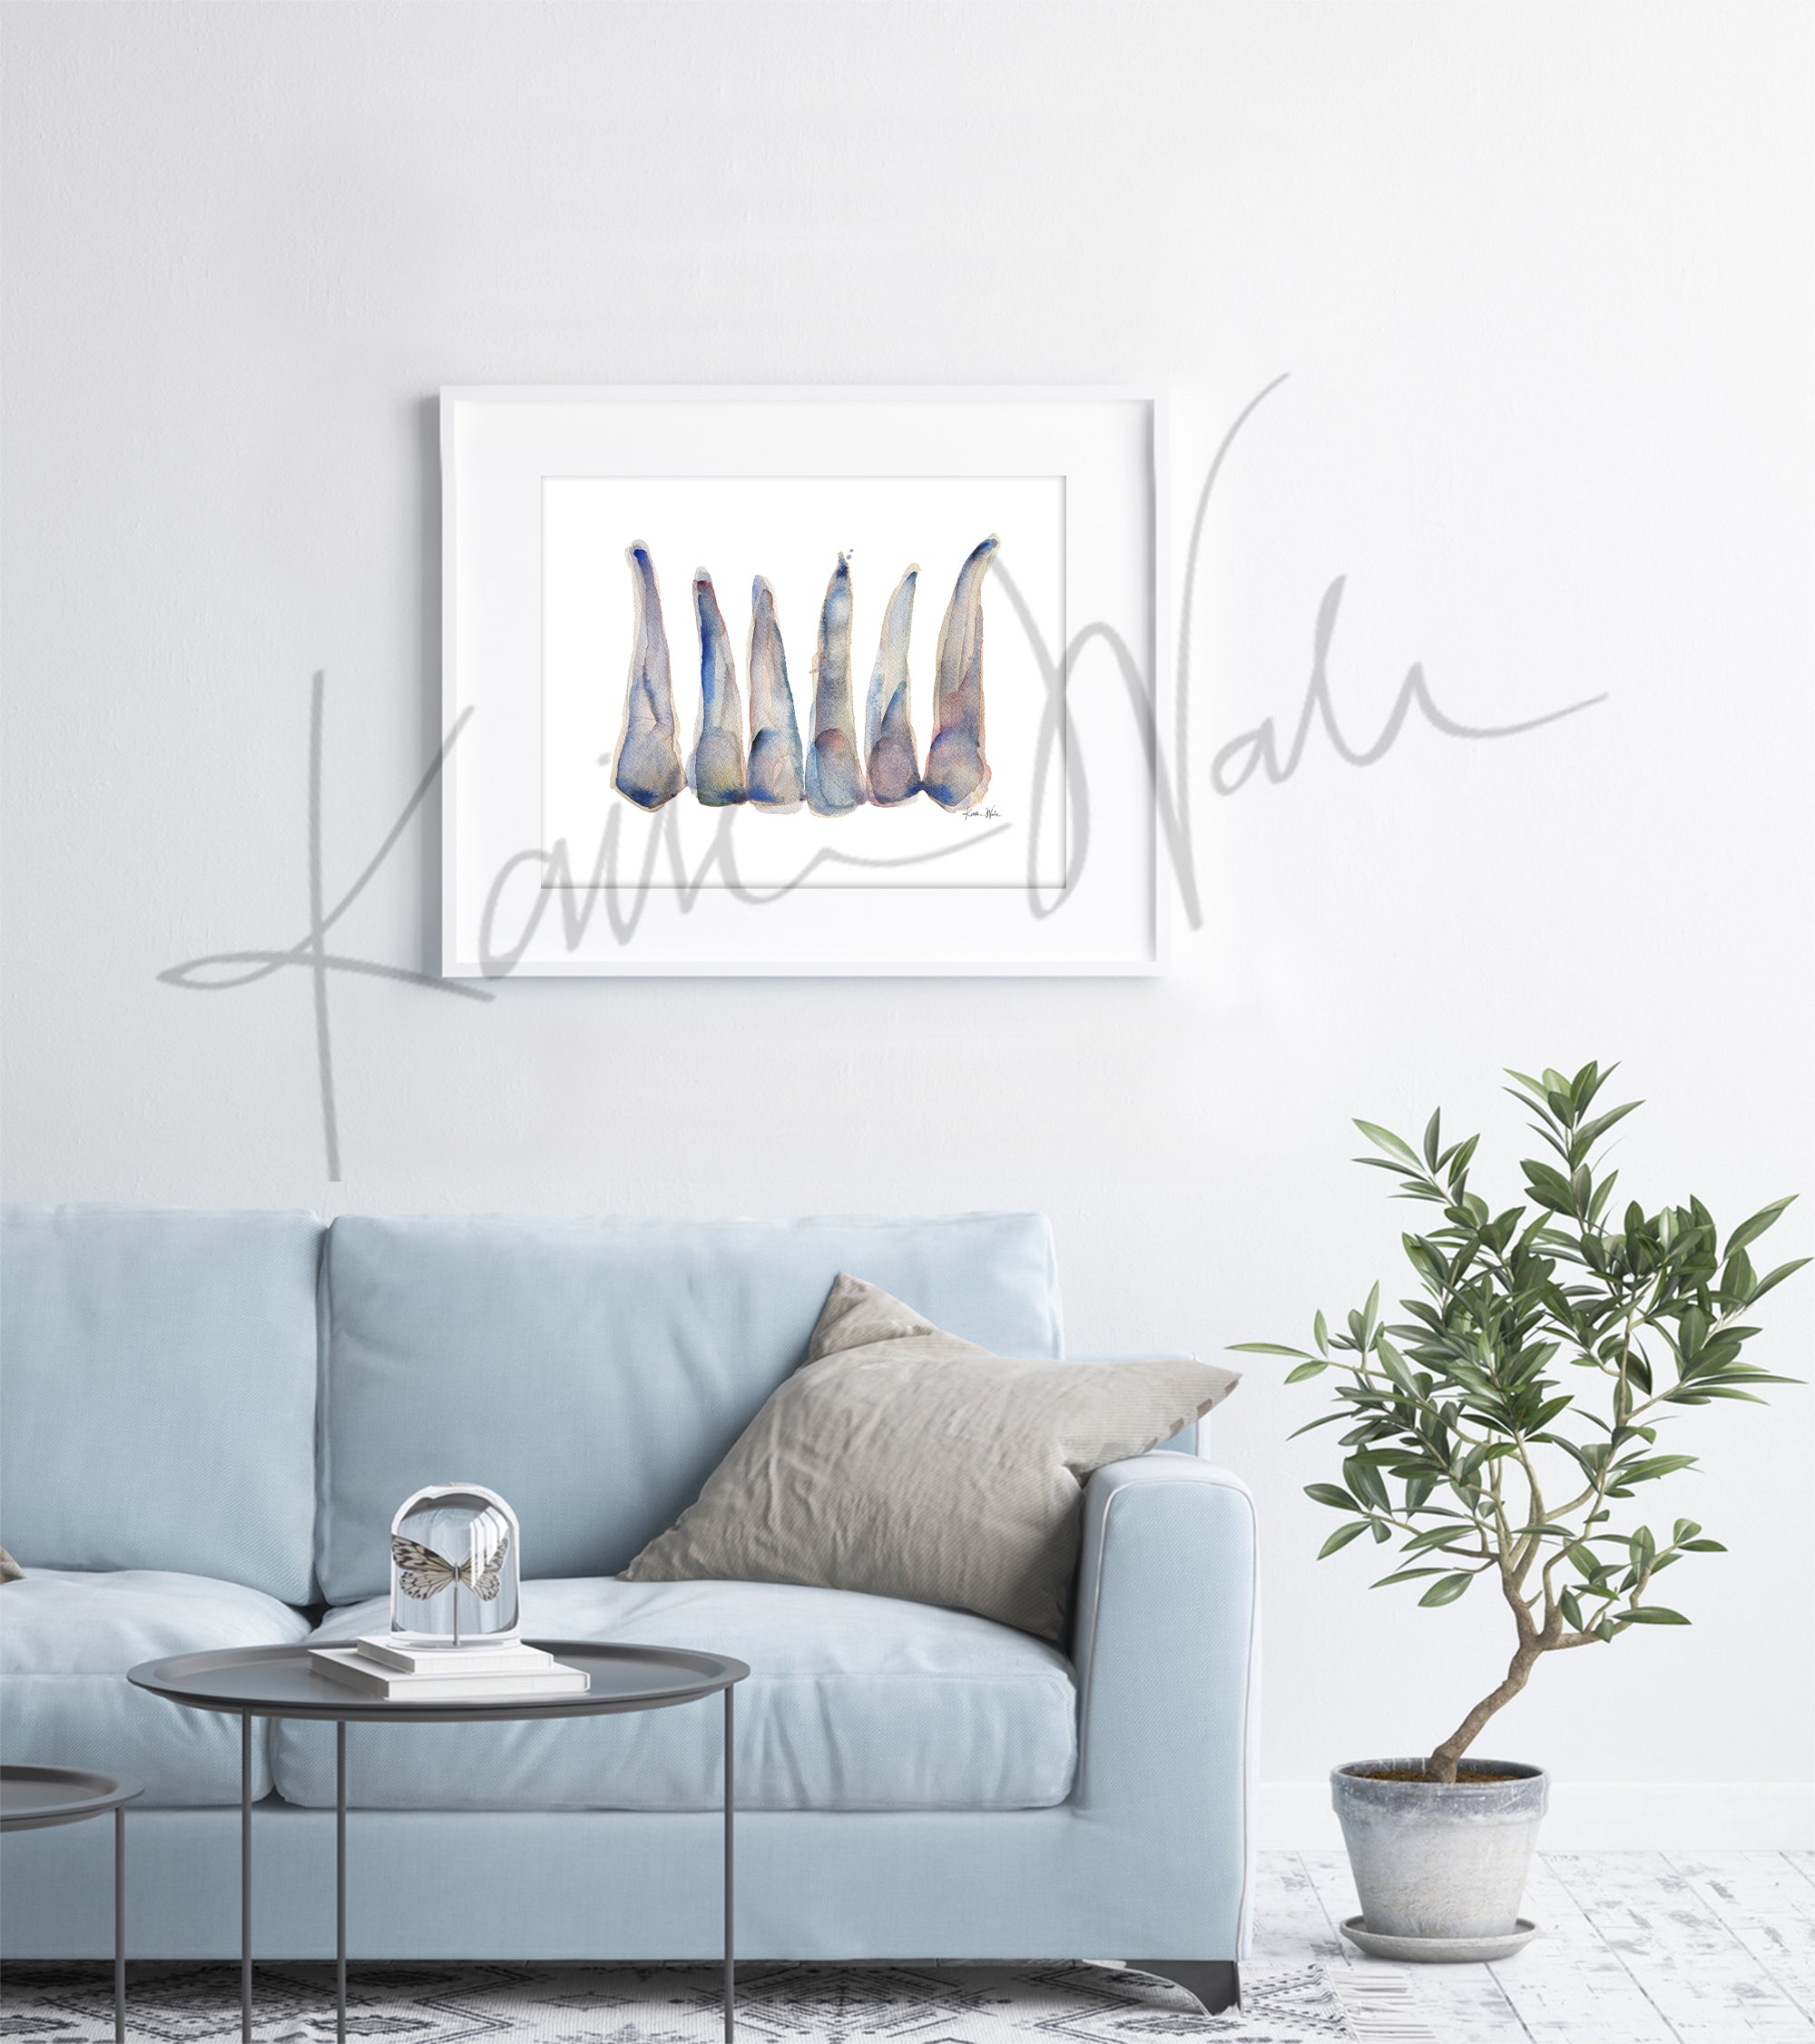 Framed watercolor painting of maxillary incisors in blue, gray and soft, subtle reds. The painting hangs over a blue couch.